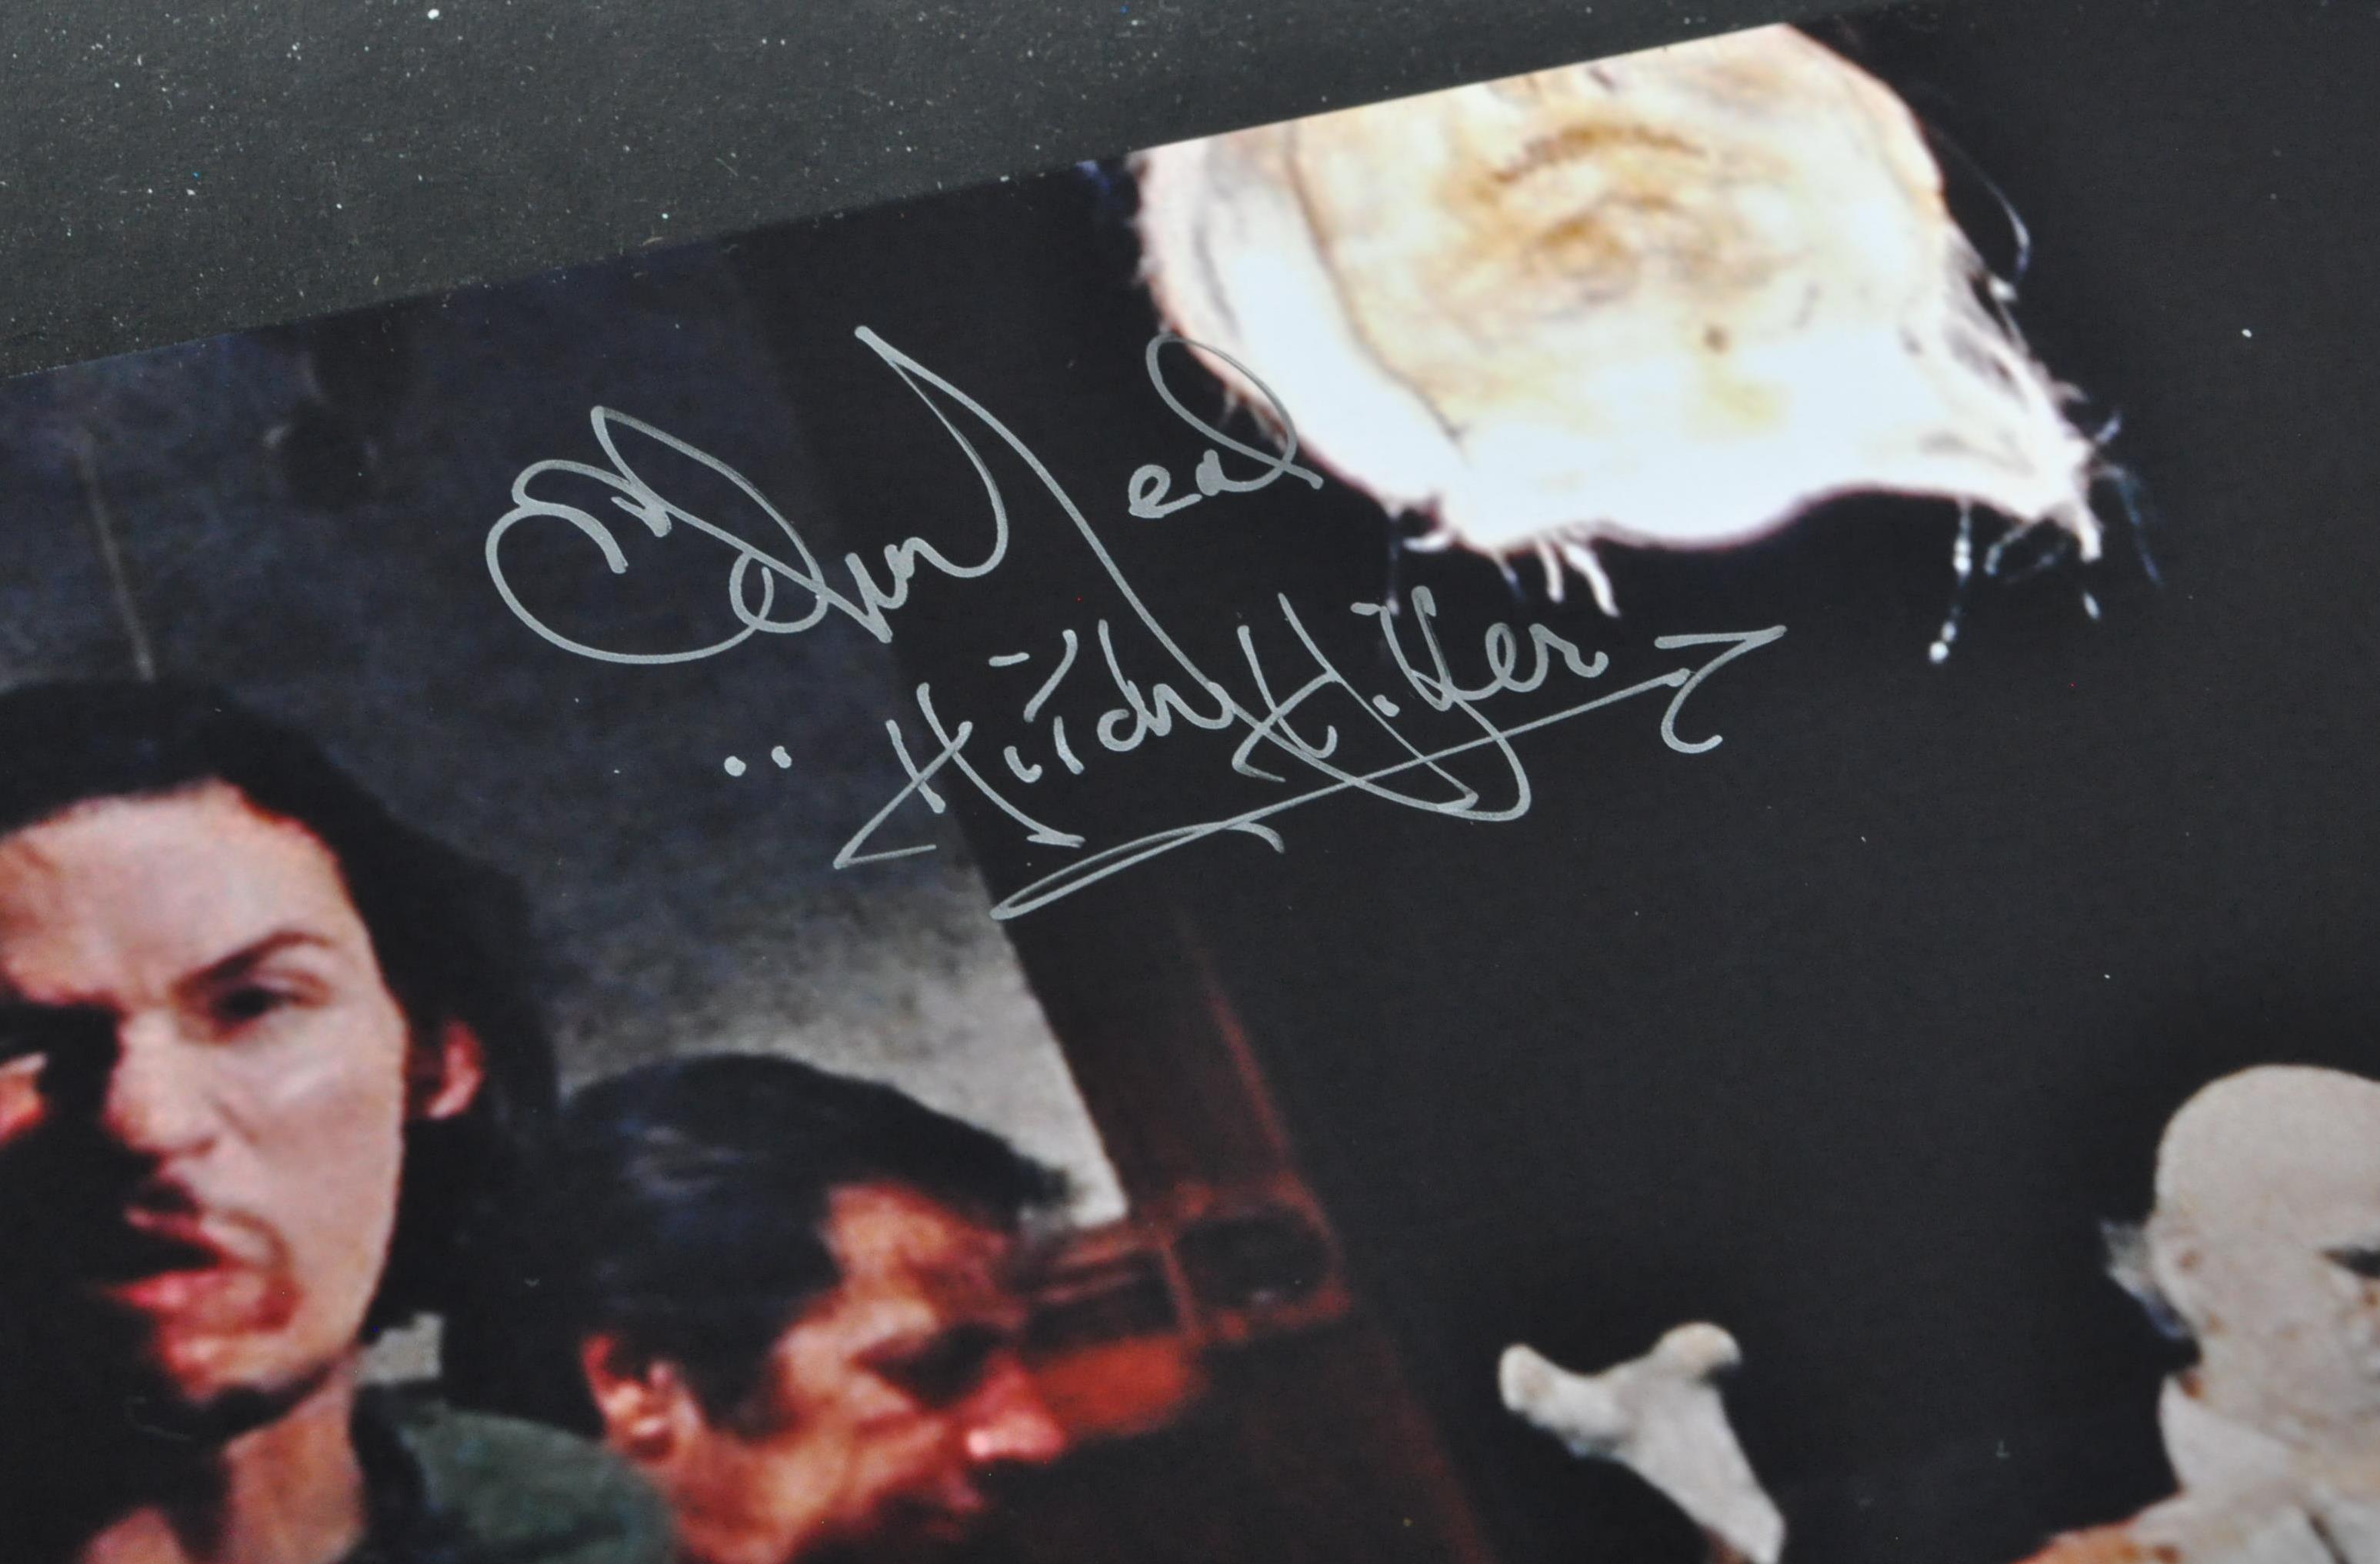 ESTATE OF DAVE PROWSE - TEXAS CHAINSAW MASSACRE - AUTOGRAPHS - Image 6 of 7